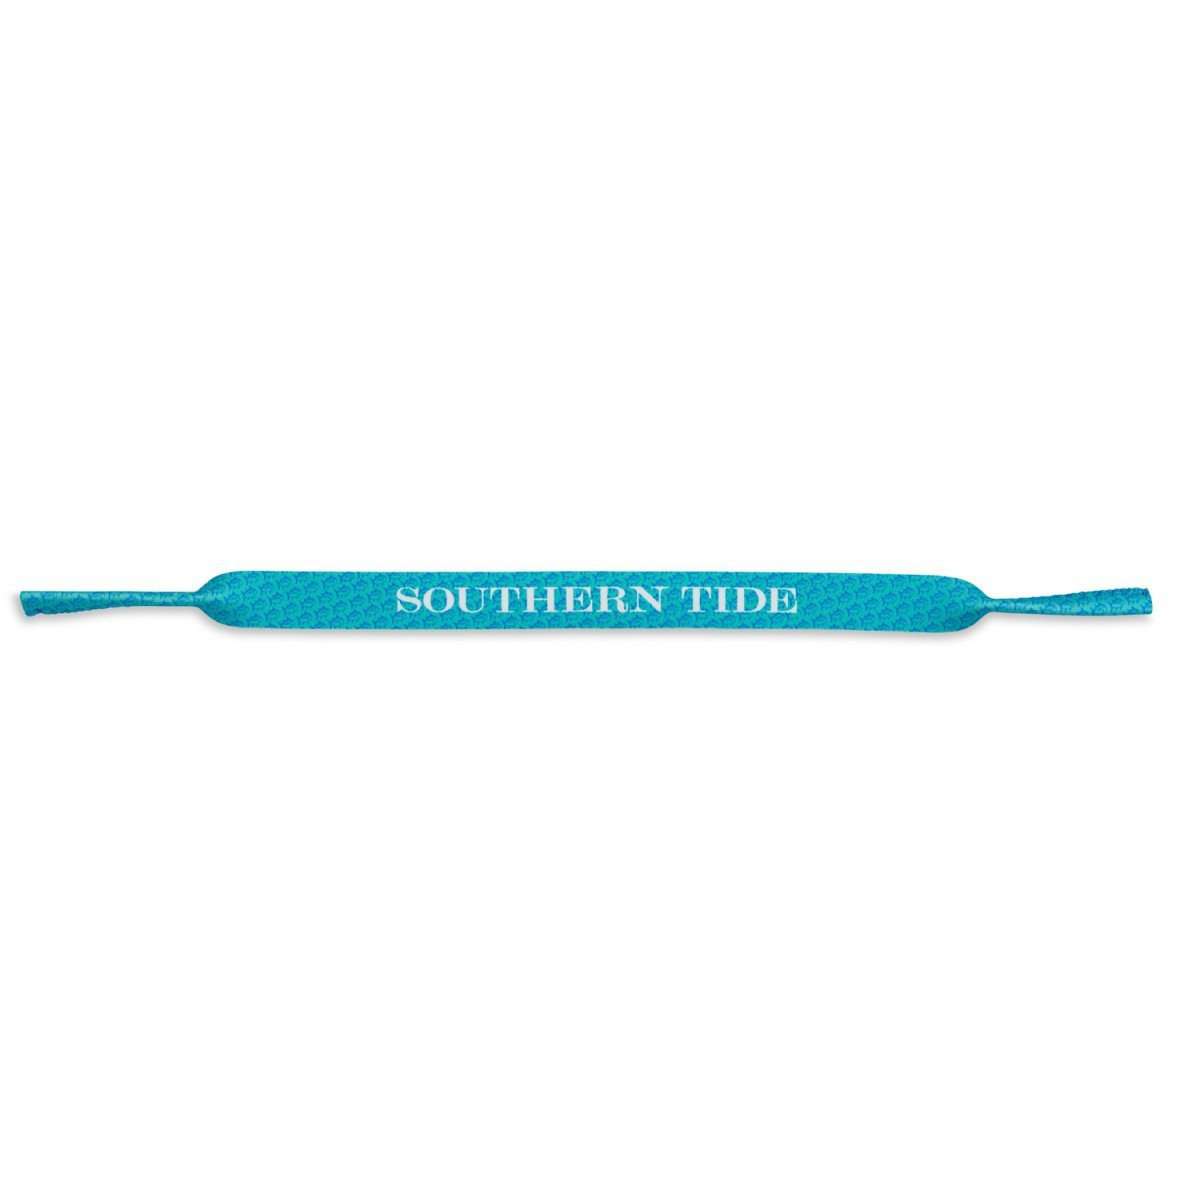 School of Fish Sunglass Straps in Teal by Southern Tide - Country Club Prep